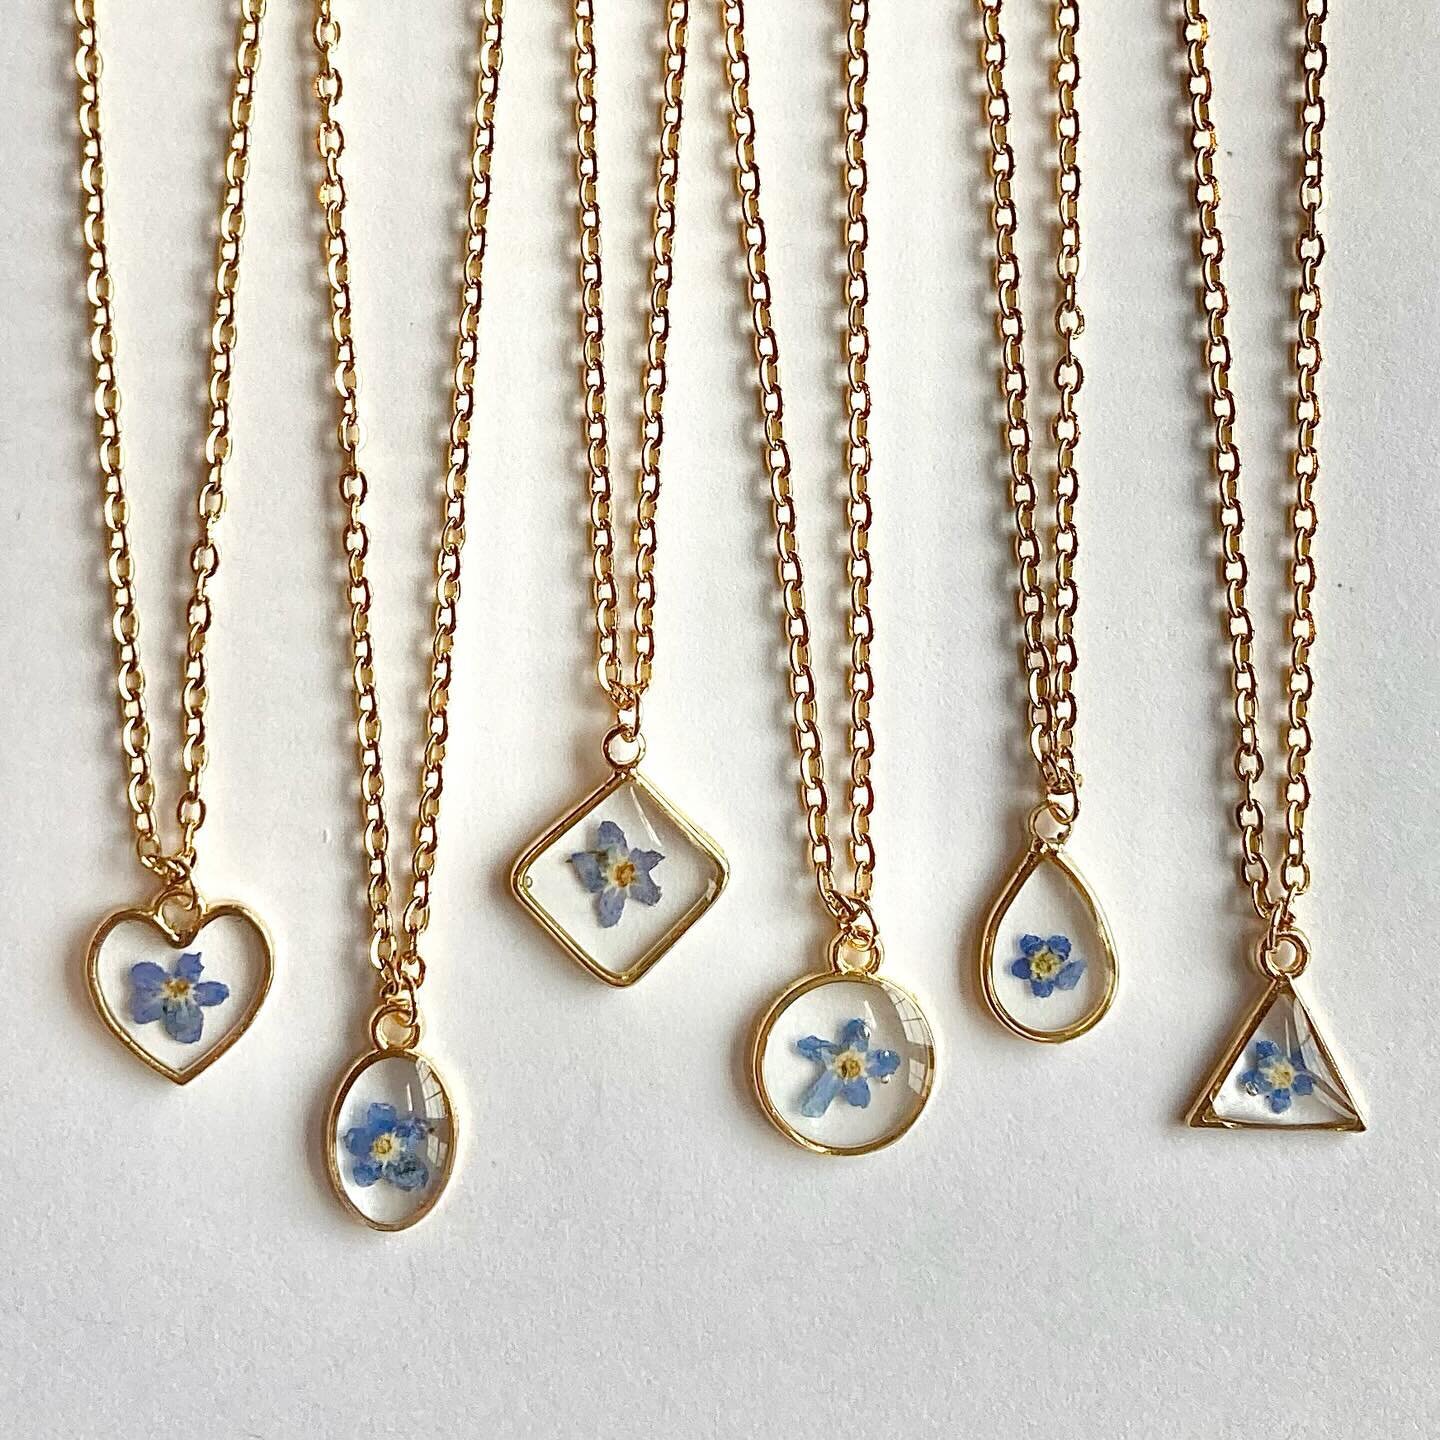 THE WINNER OF THE GIVEAWAY IS @hanafirestoneart 🥳 

Thank you to everyone who entered! I just restocked my online shop with tiny forget-me-not necklaces in a variety of shapes (amongst other things!) AND if you entered, DM me for free shipping on an